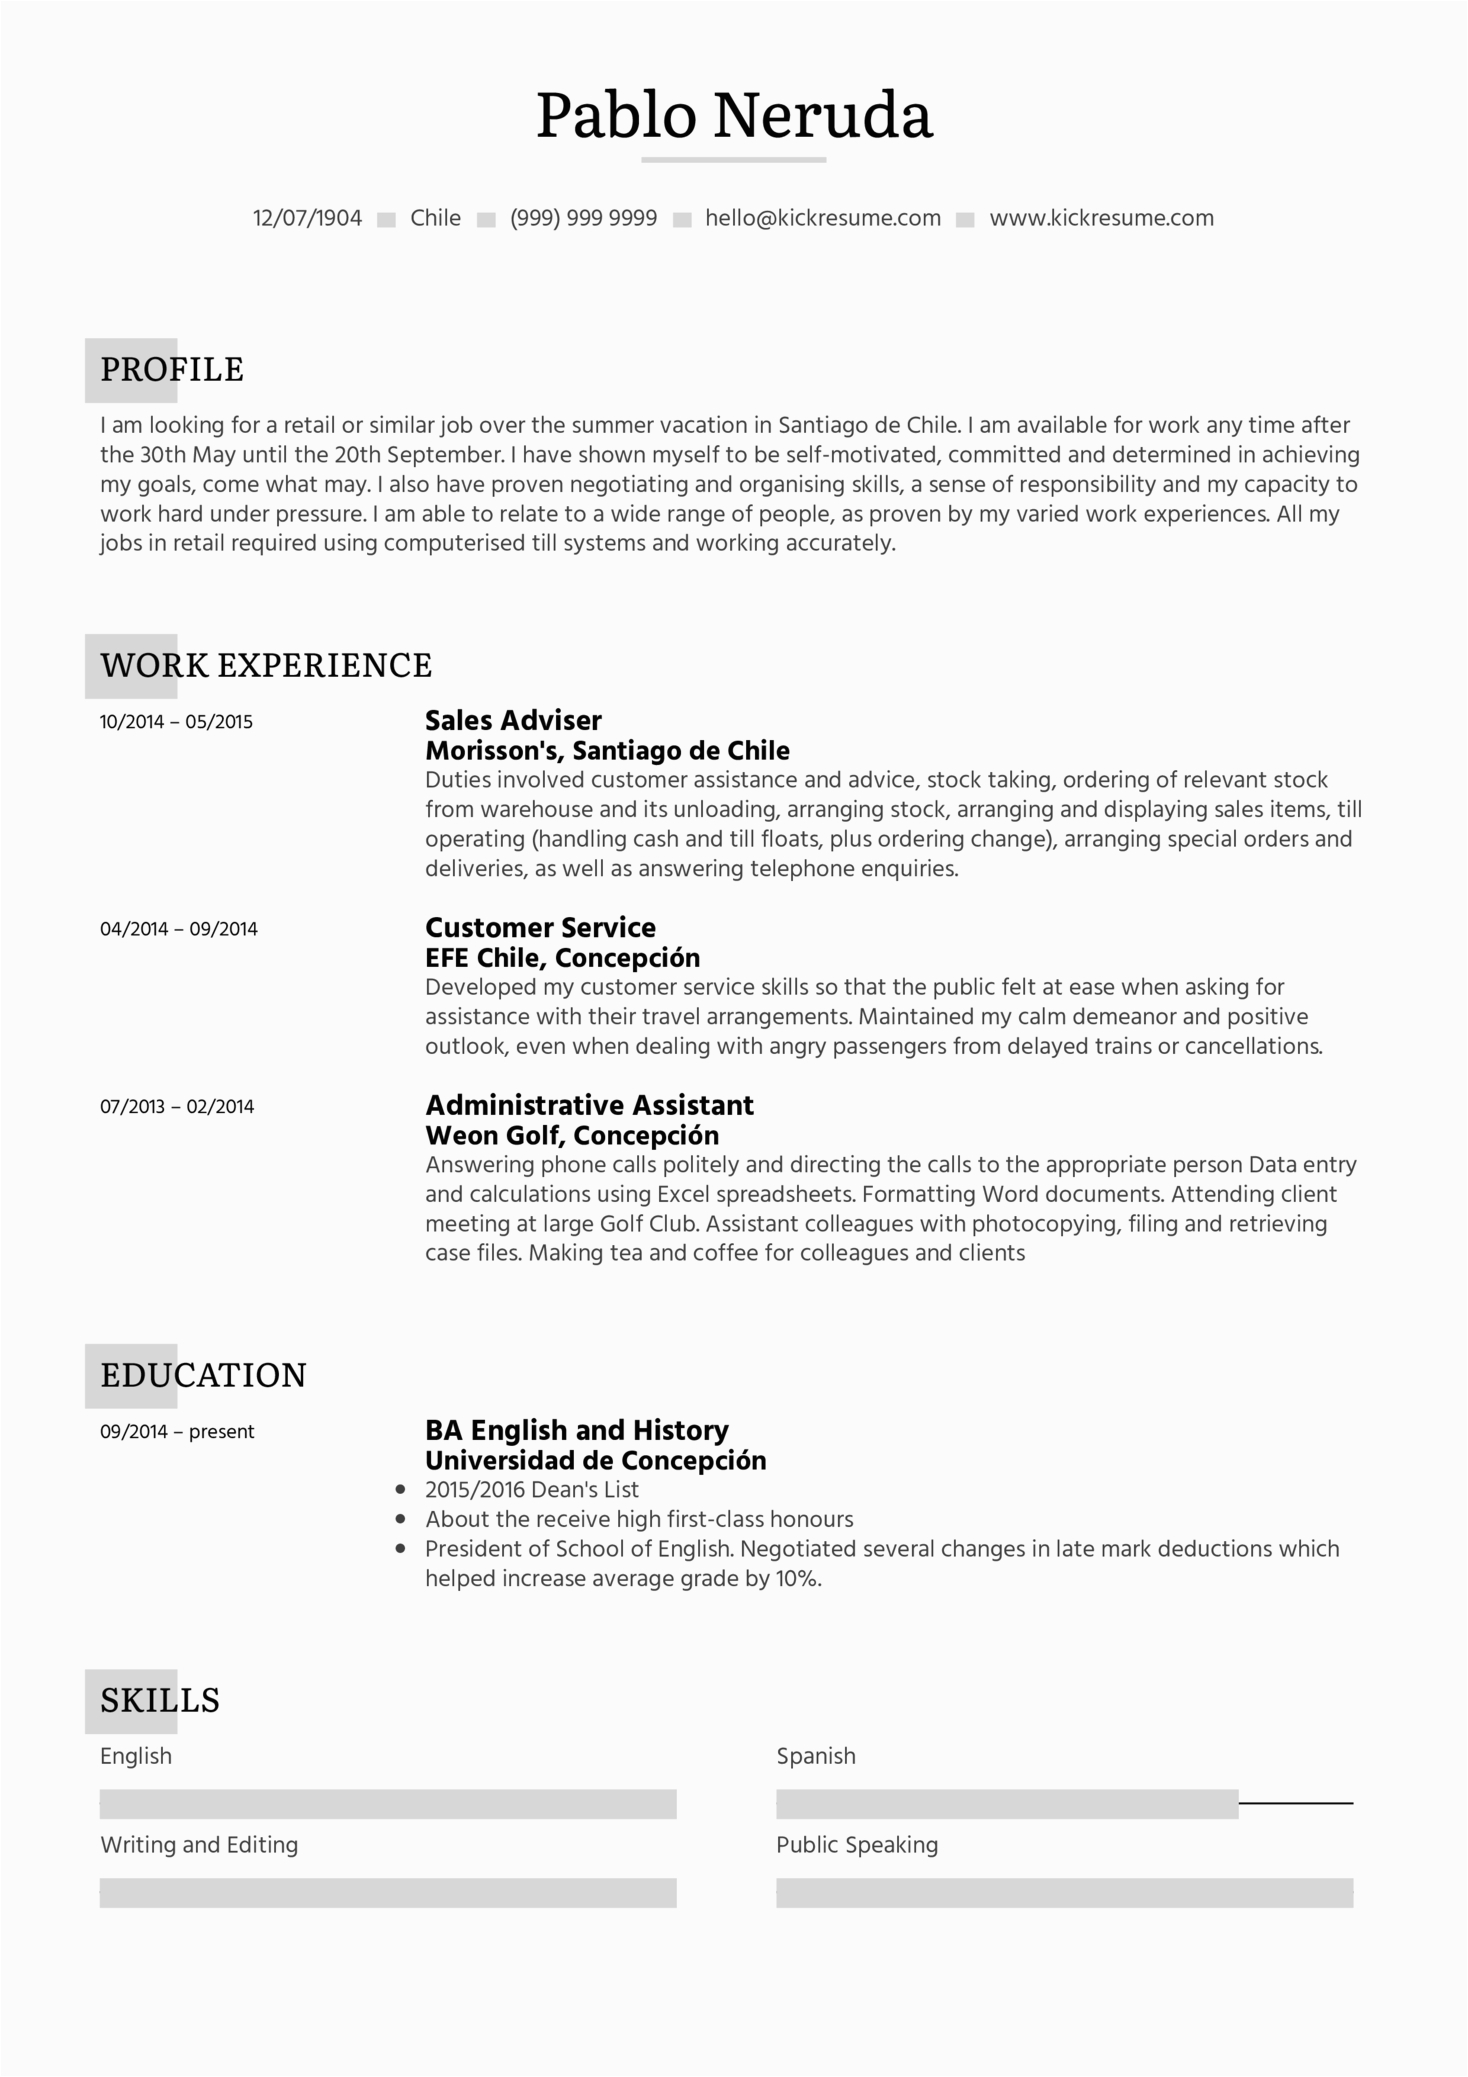 Resume Template for On Campus Job Resume Examples by Real People Student Resume Summer Job